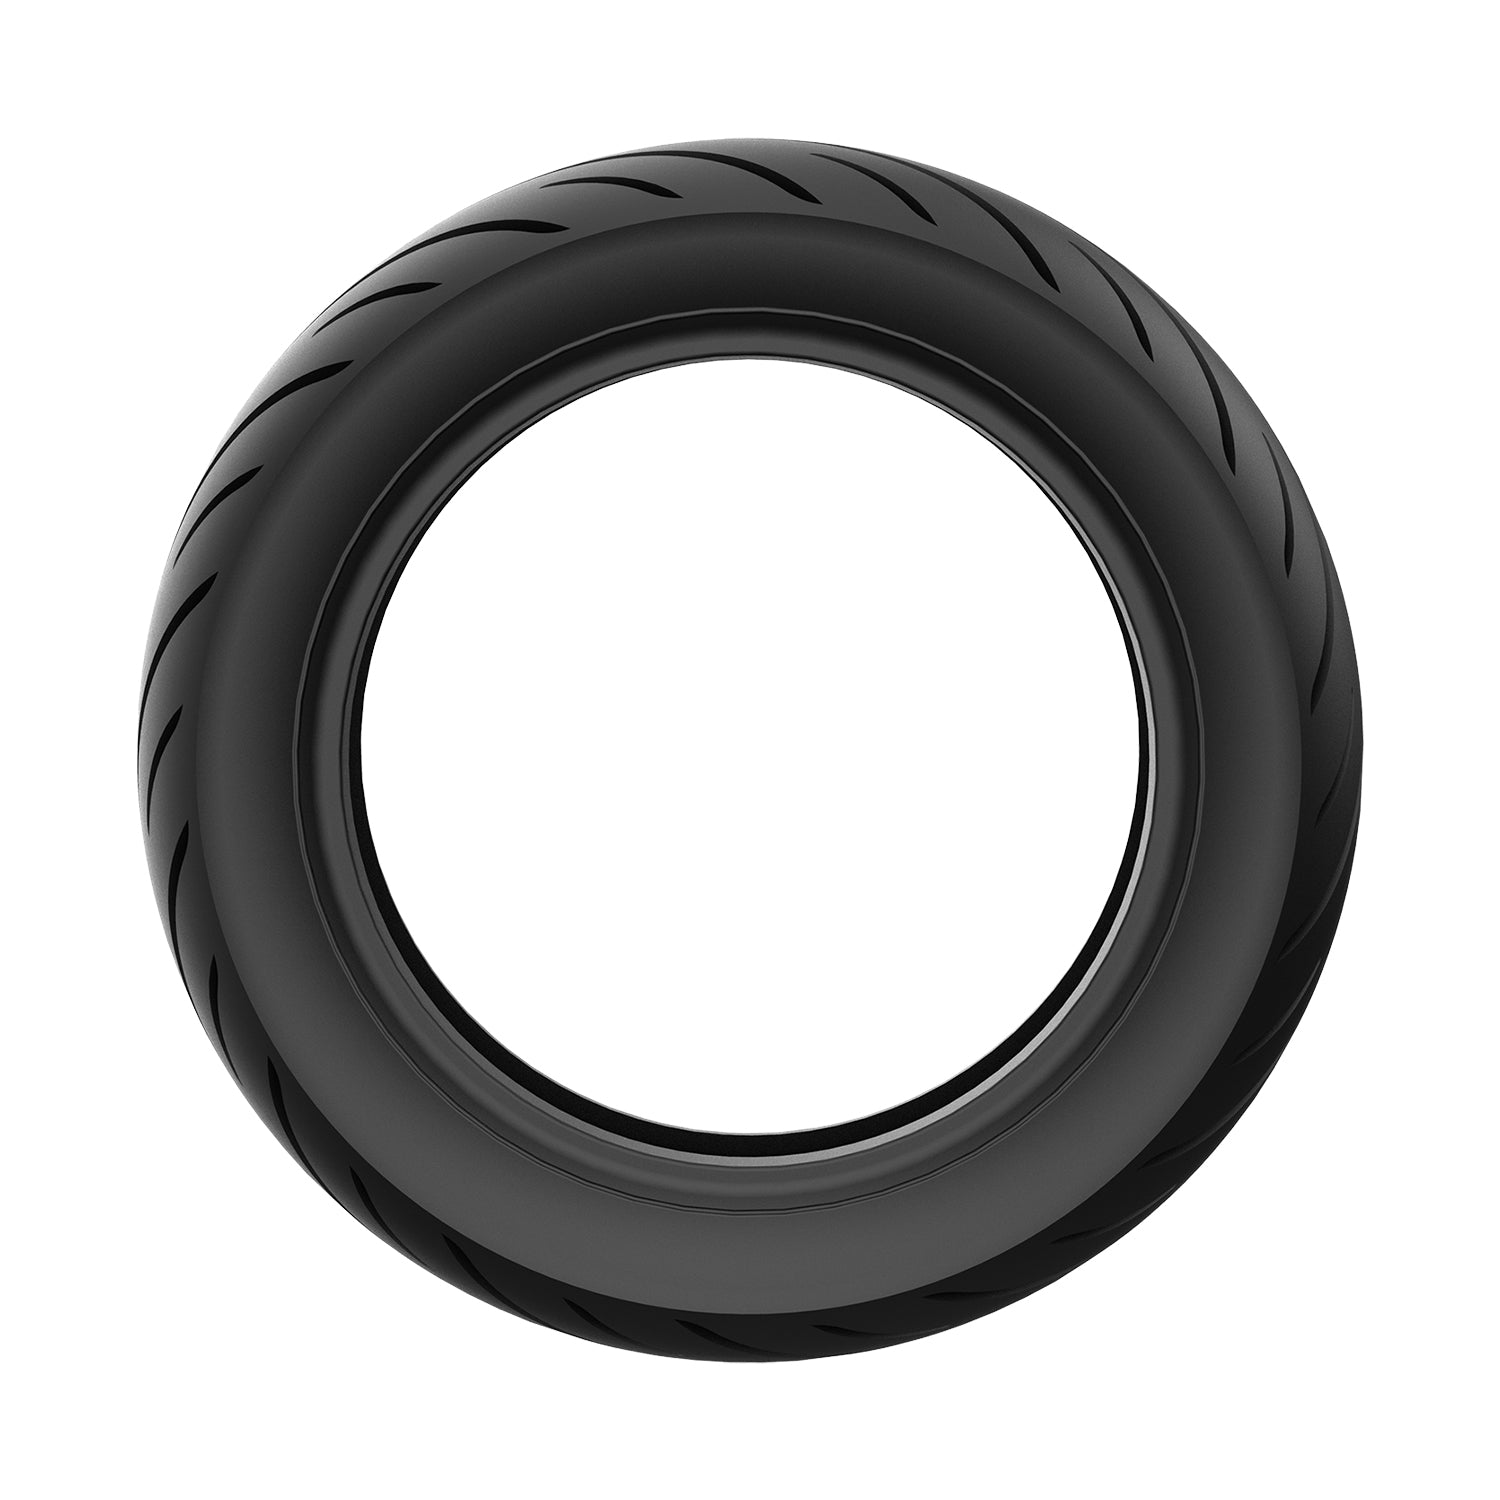 NIU tires for KQi Scooters